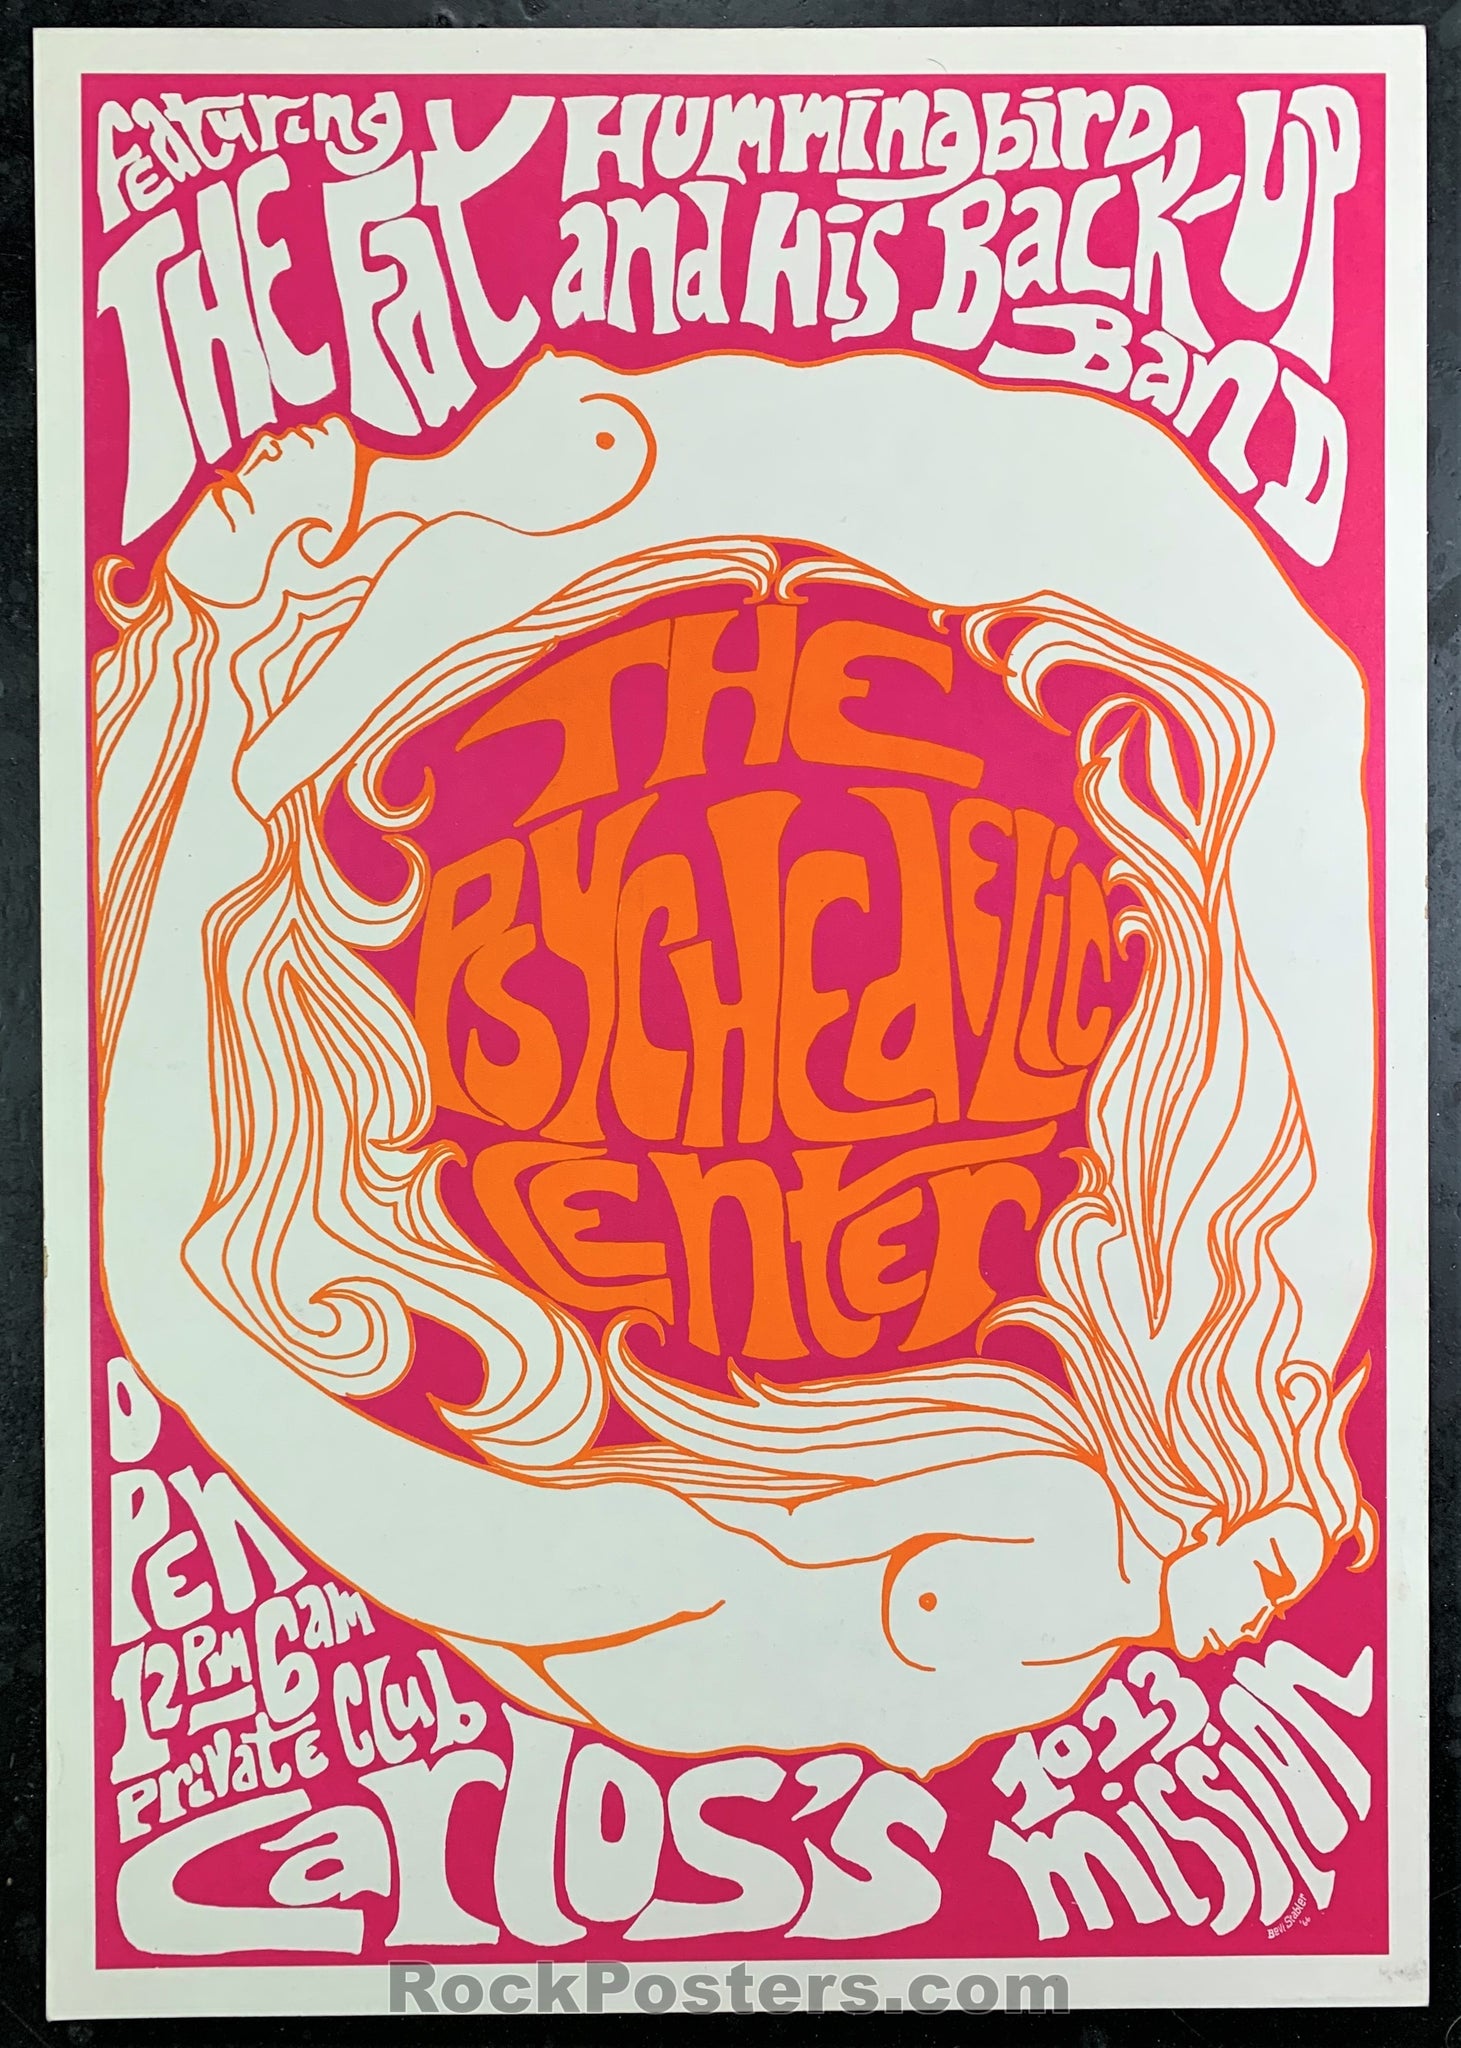 AUCTION - San Francisco - Psychedelic Center - 1966 Poster - Carlos’s  -  Near Mint